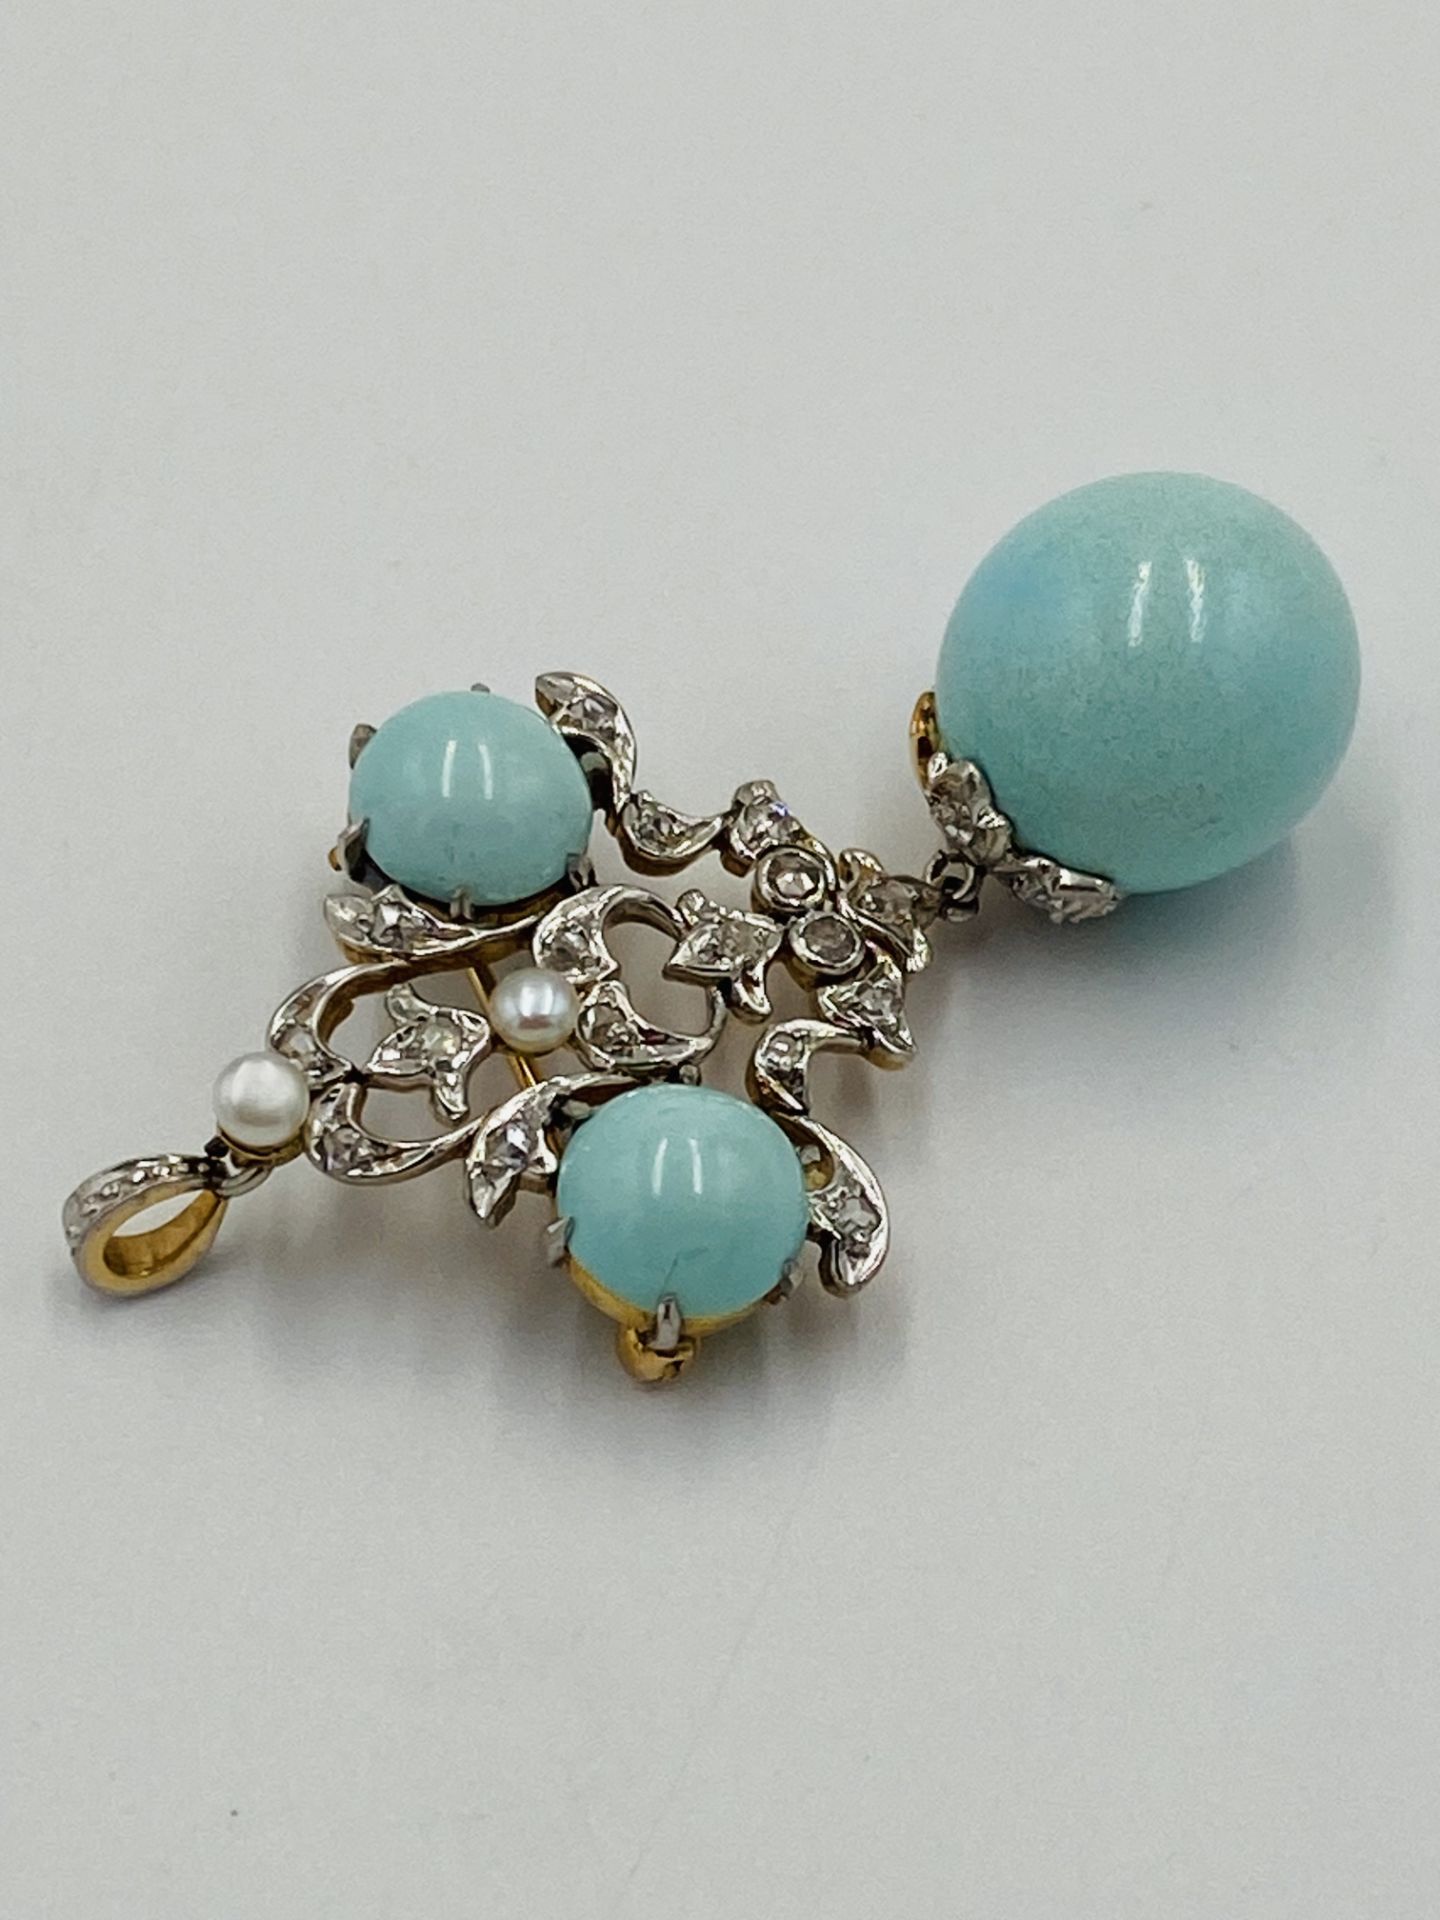 Turquoise and diamond brooch/pendant - Image 3 of 5